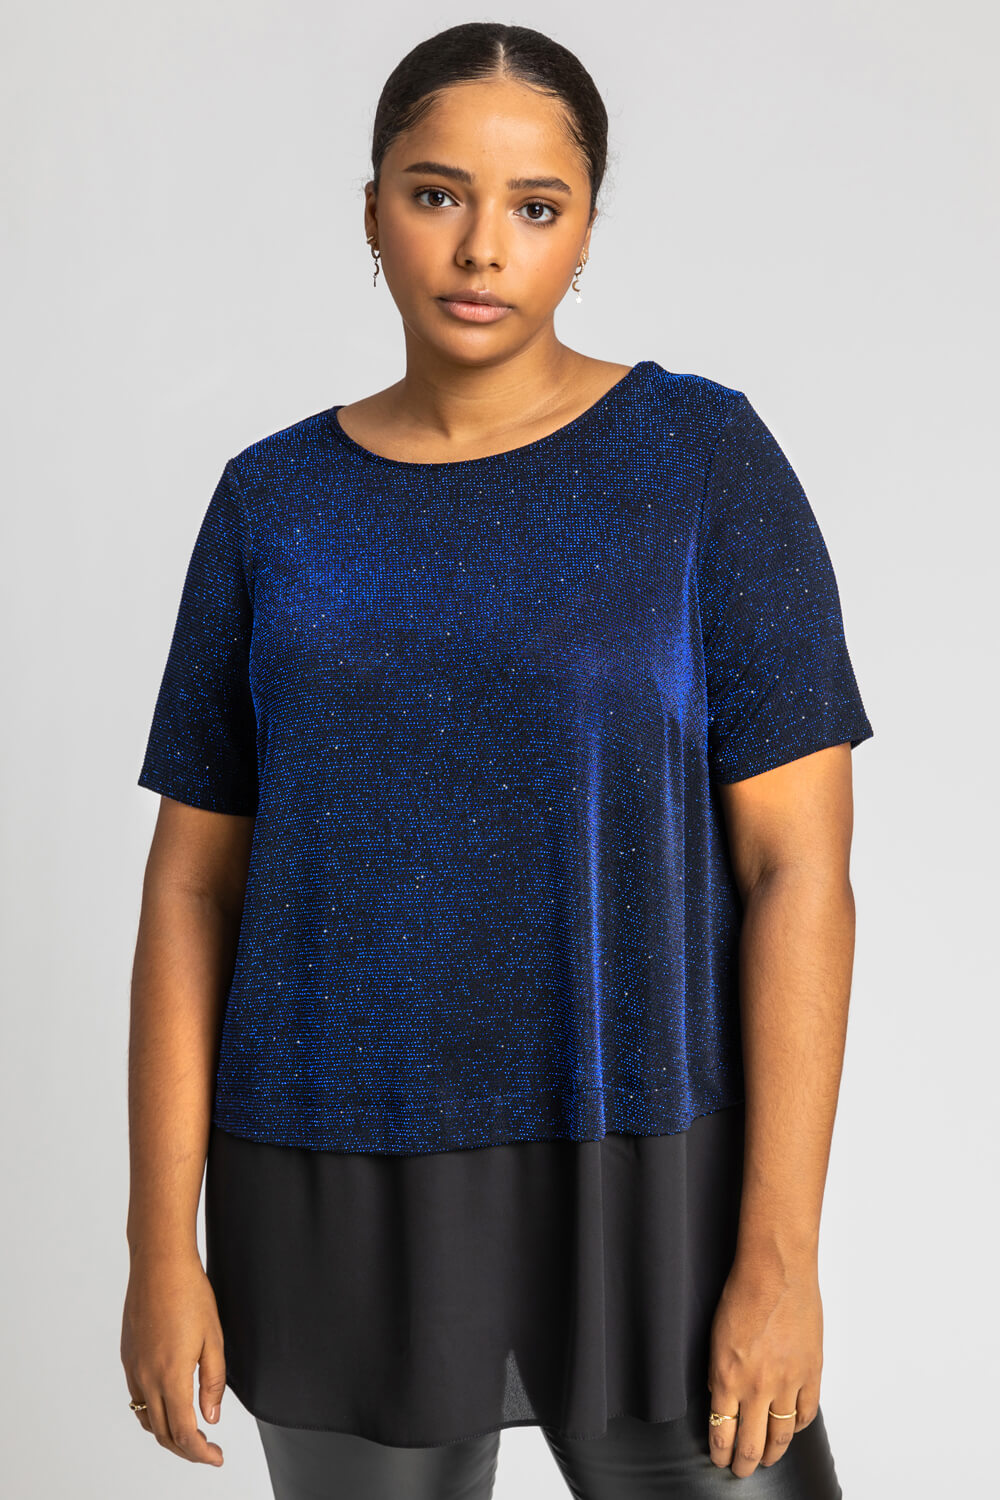 Royal Blue Curve Sparkle Overlay Top, Image 5 of 5